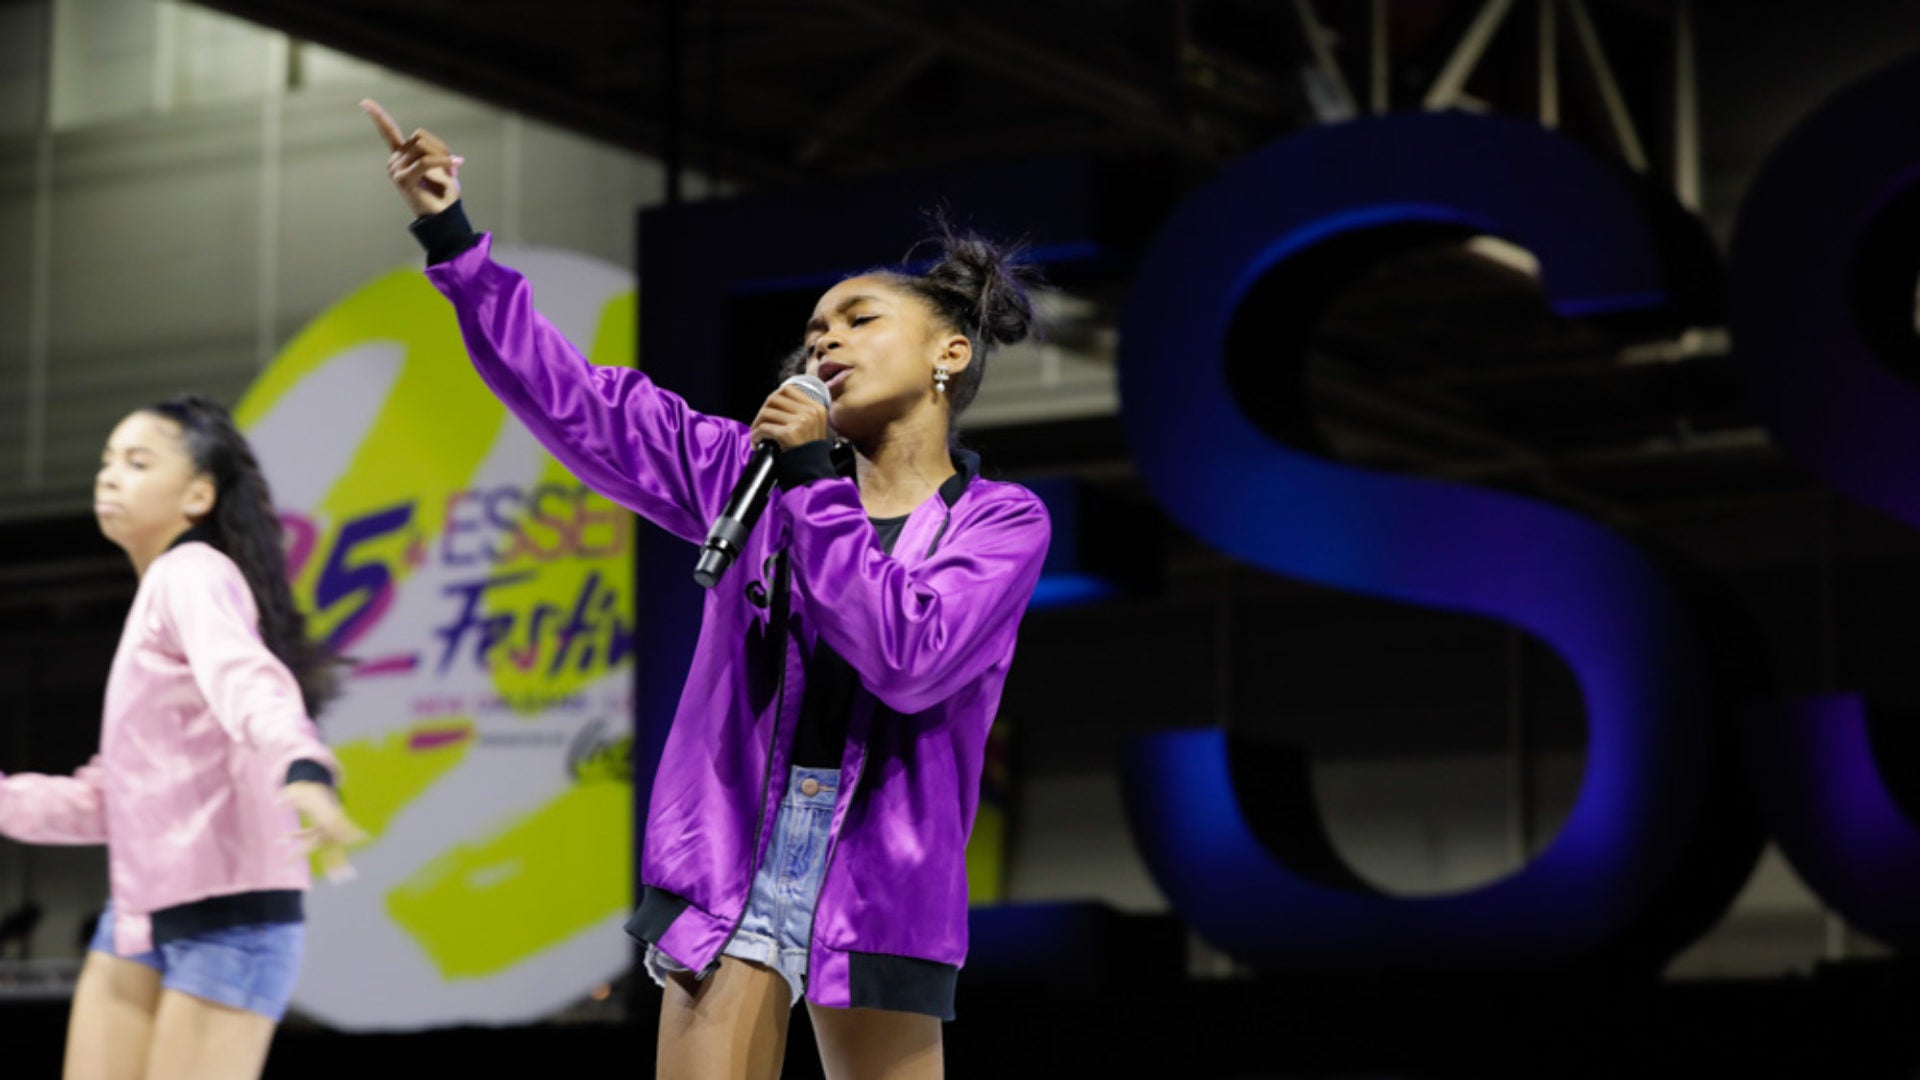 Viral Sensation That Girl Lay Lay Rocks Essence Festival's Center Stage Like A Pro